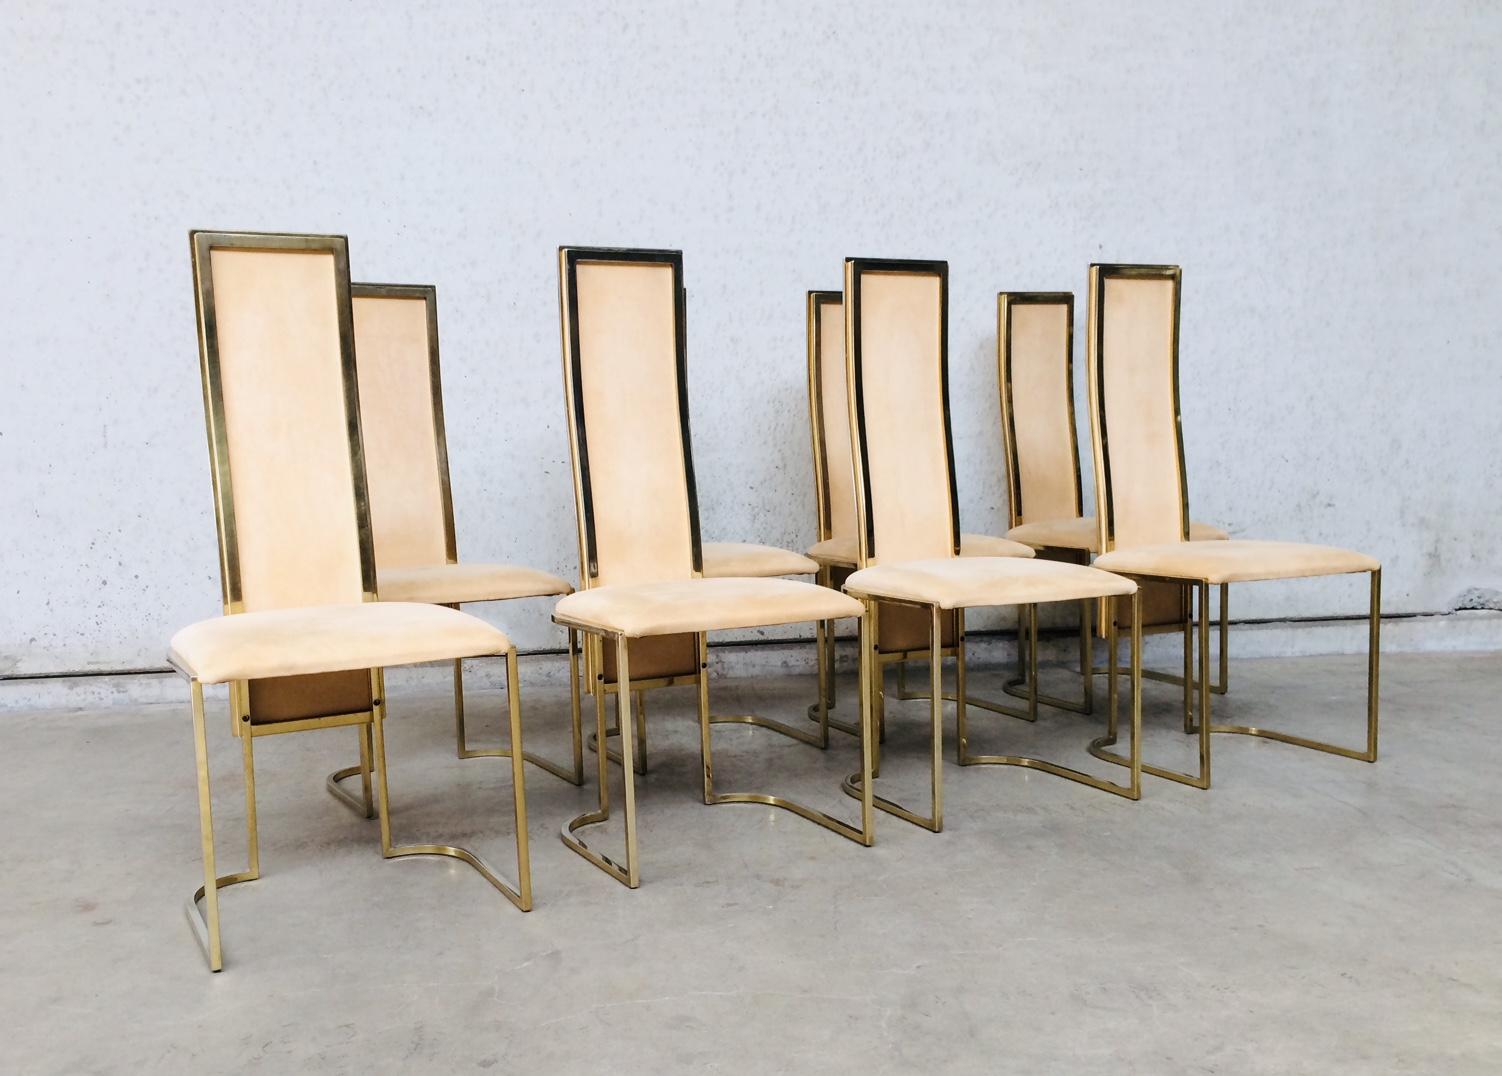 Post-Modern Hollywood Regency Design Set of 8 Dining Chairs by Belgo Chrom, 1970's For Sale